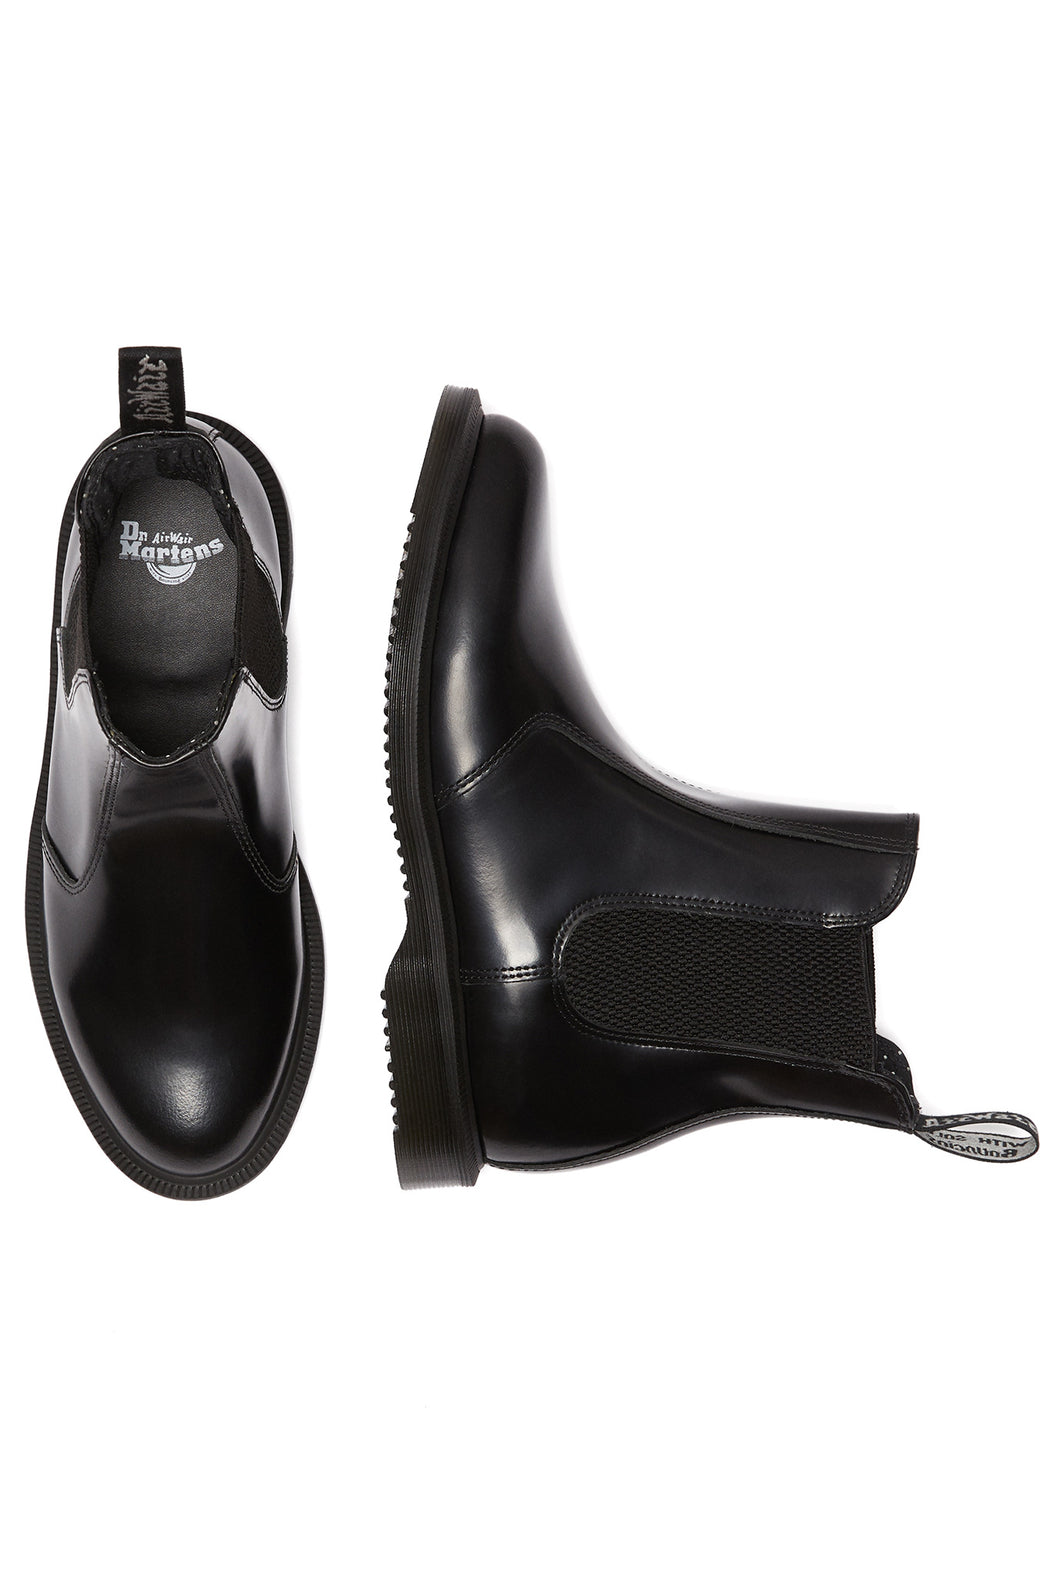 Dr Martens Flora Smooth Leather Chelsea Boot Black